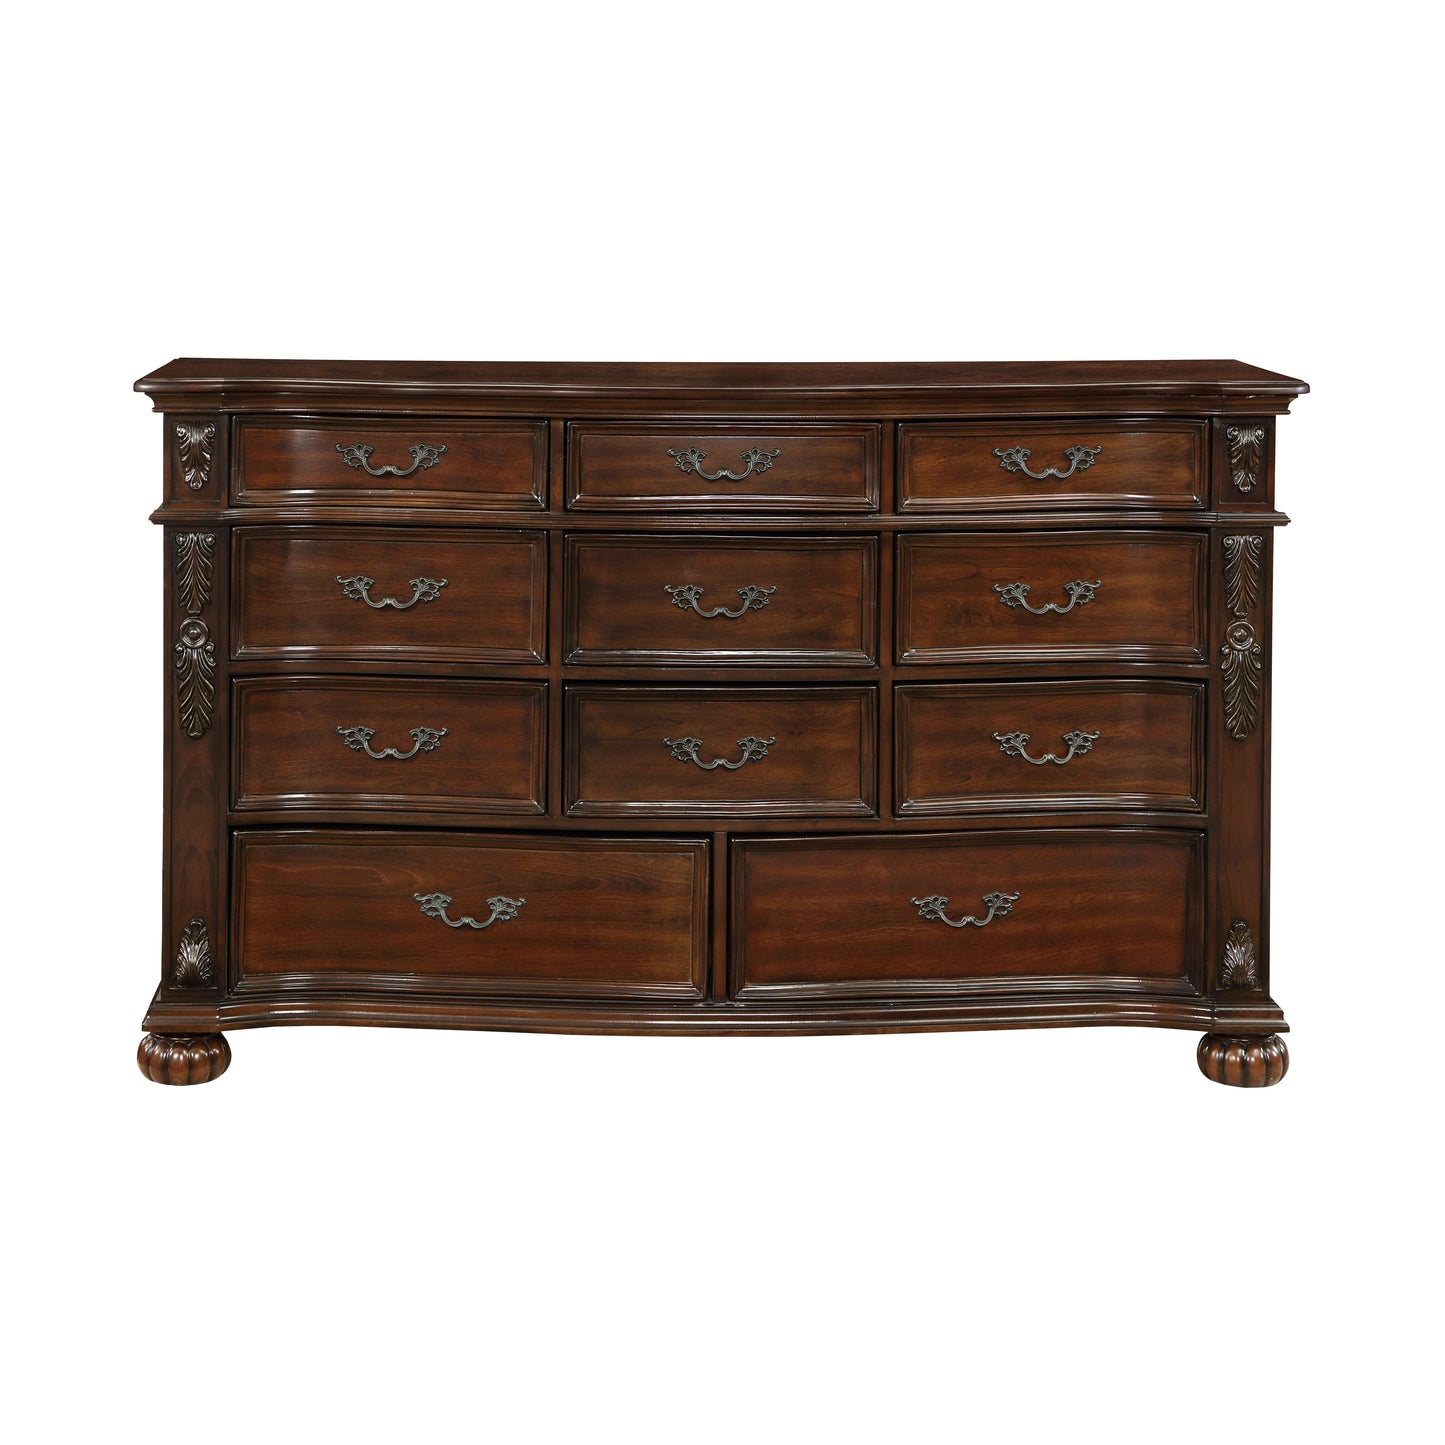 Classic Traditional 1pc Dresser of 11 Drawers Cherry Finish Formal Bedroom Furniture Carving Wood Design